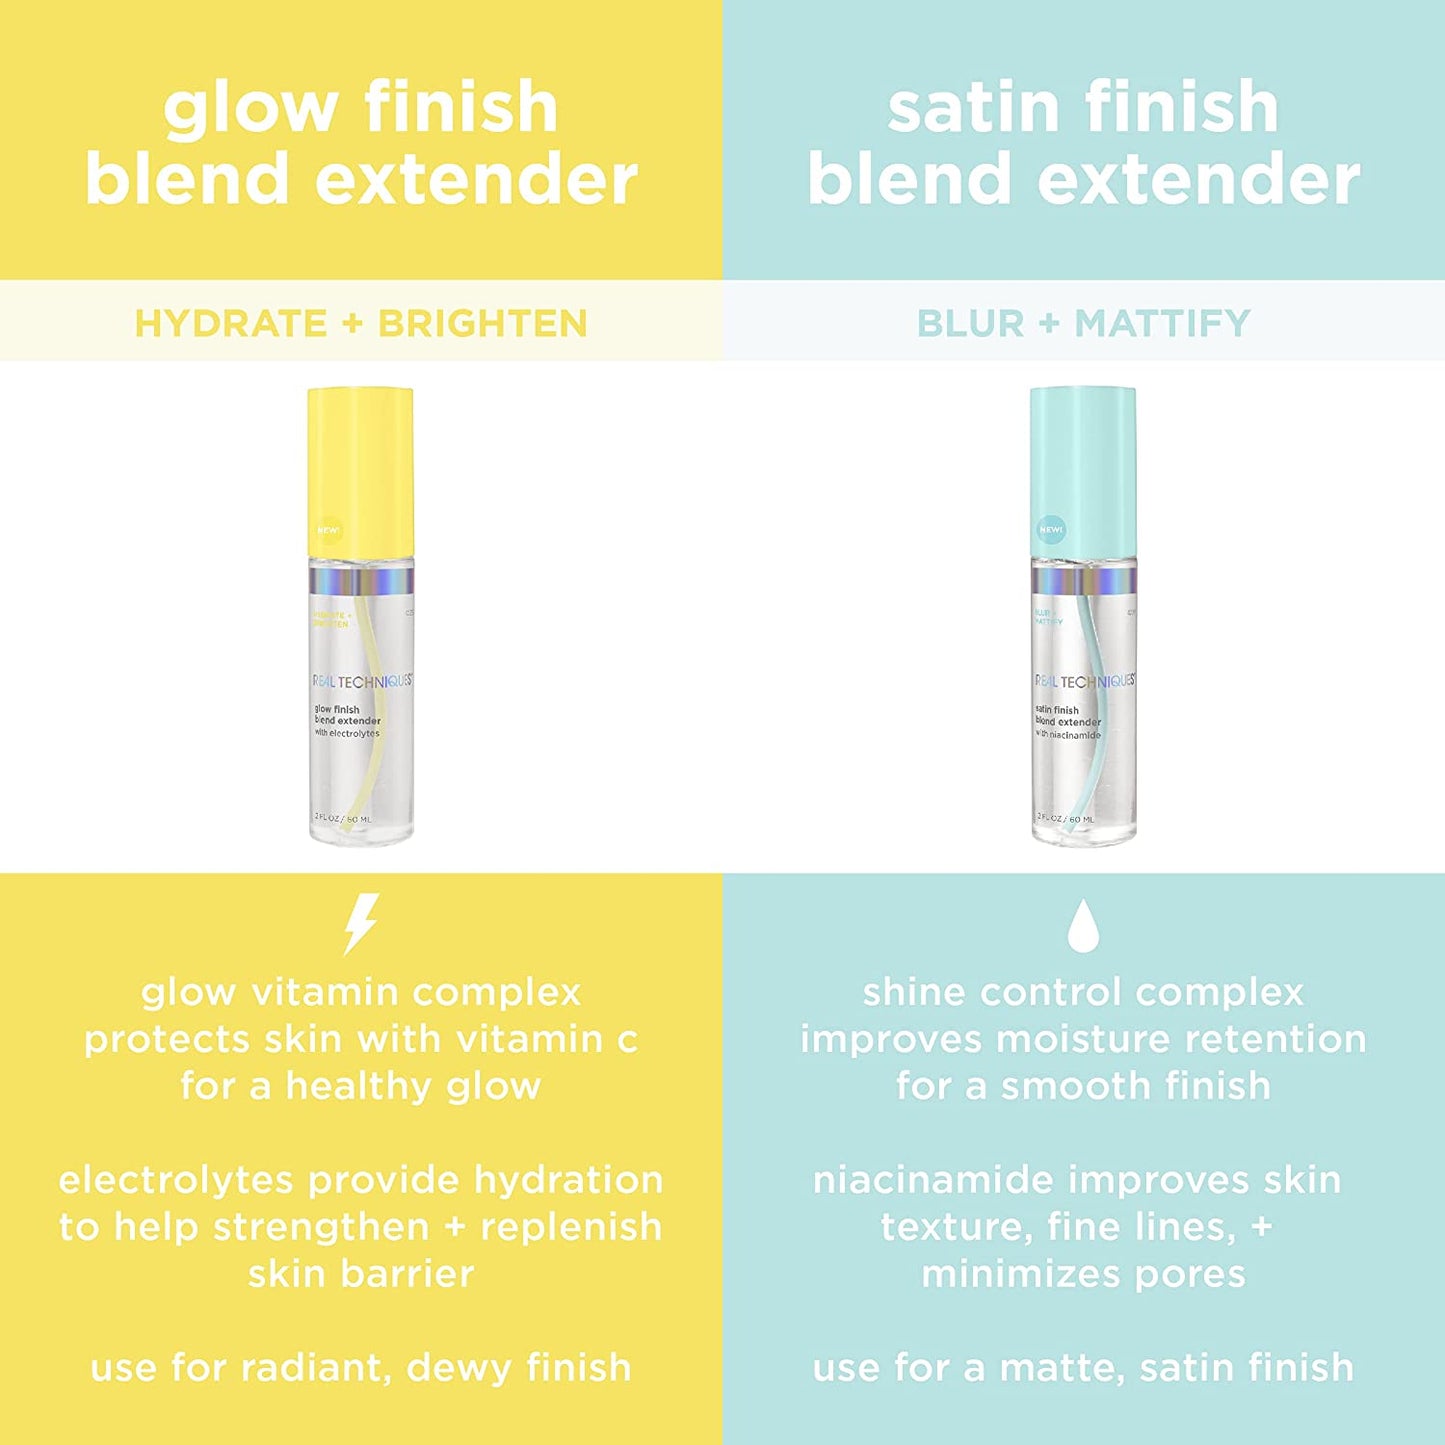 Real Techniques Blur + Mattify Makeup Setting Spray for Face - Satin Finish Blend Extender With Niacinamide 2 FL OZ / 60 ML